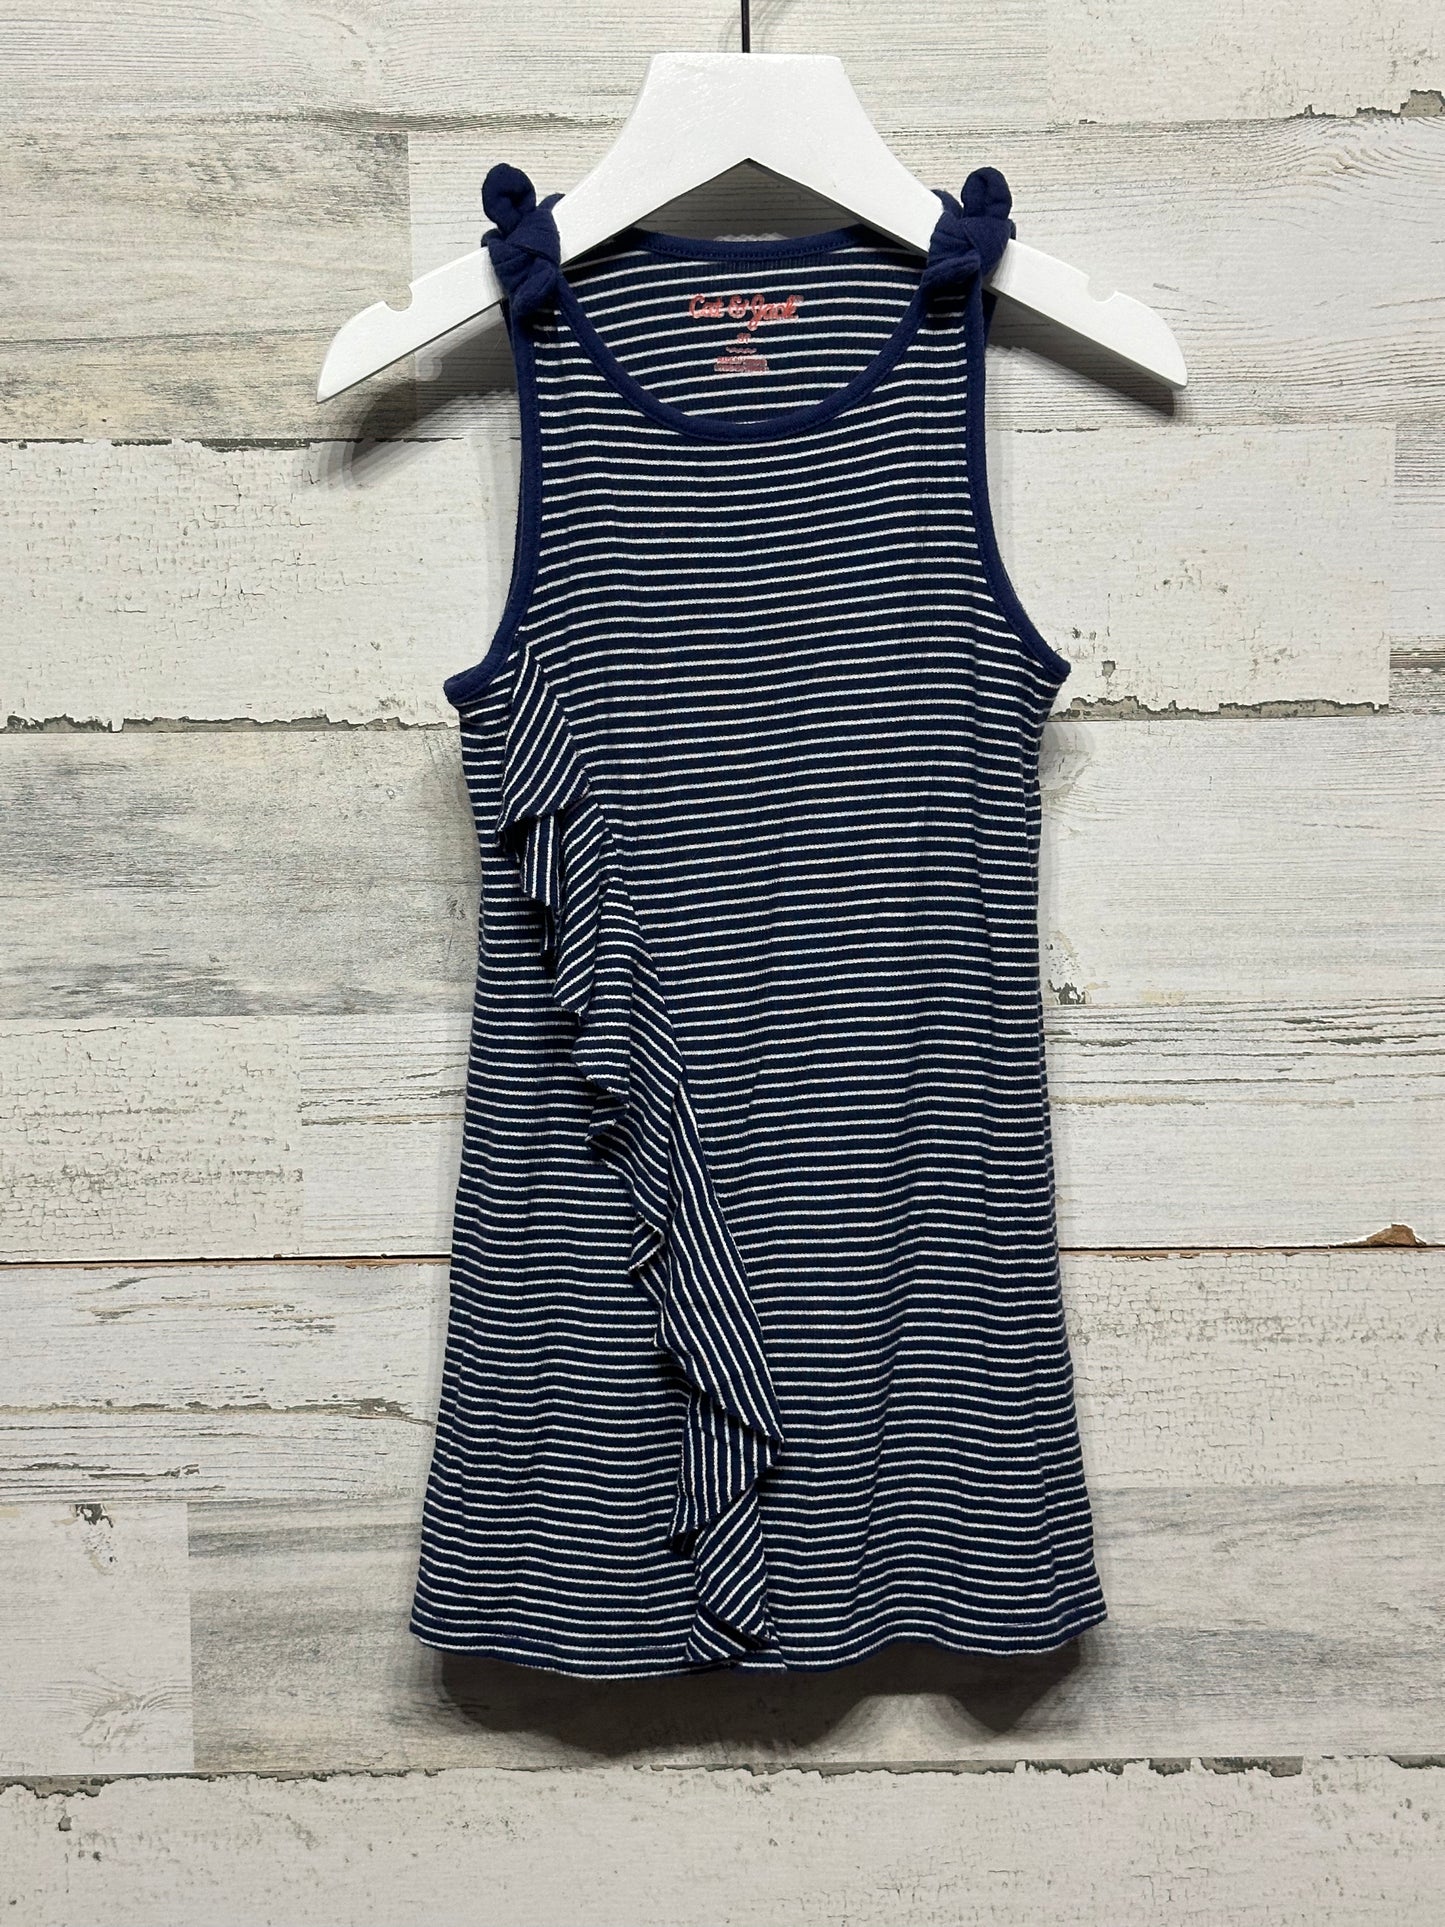 Girls Size 3t Cat and Jack Soft Navy Striped Dress - Good Used Condition